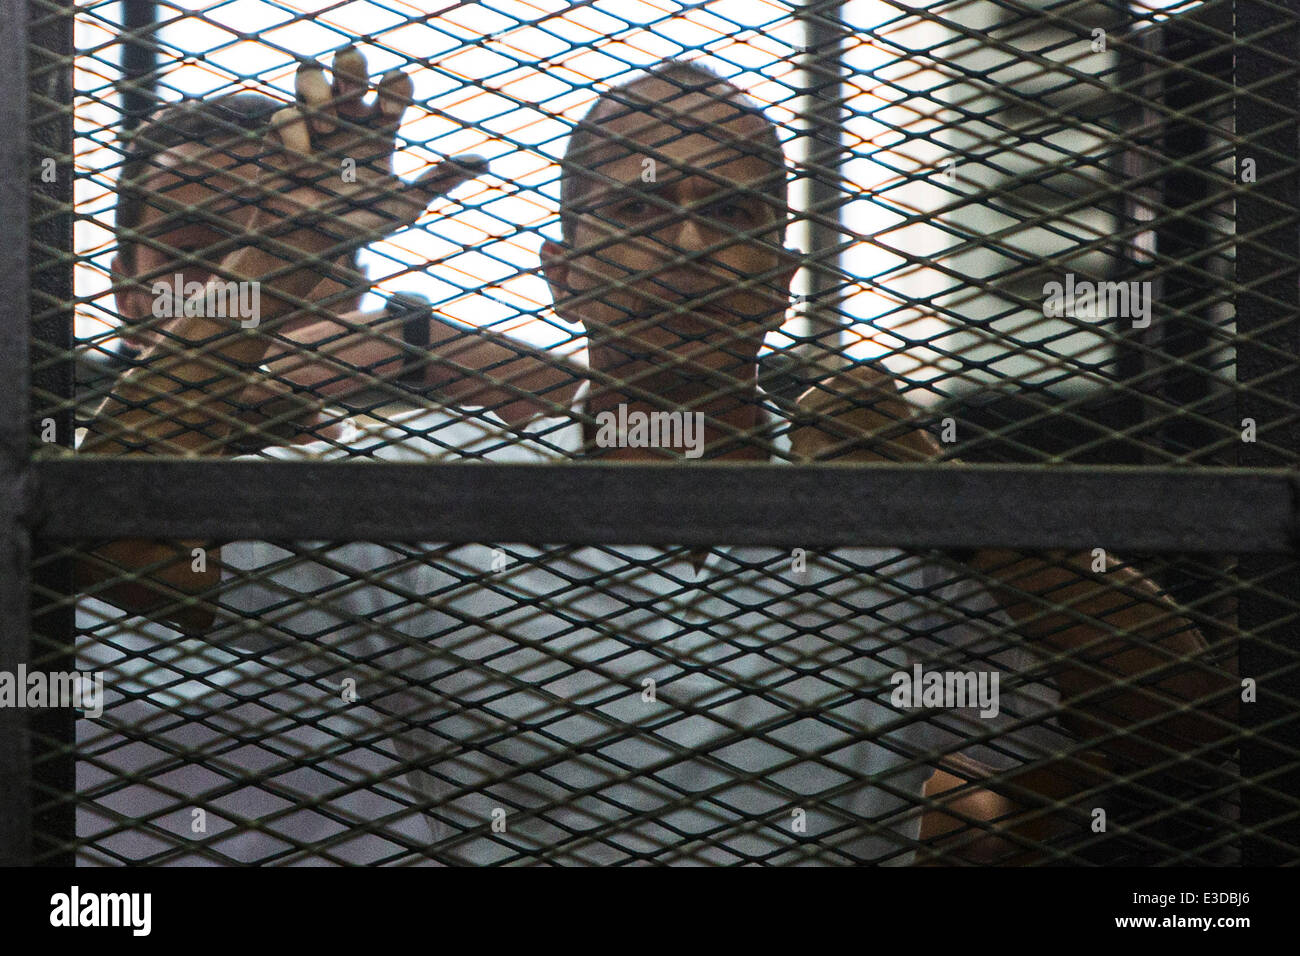 Cairo, Egypt. 23rd June, 2014. Al-Jazeera's Australian journalist Peter Greste stands behind bars as he listens to the verdict at a court in Cairo, June 23, 2014. An Egyptian court on Monday sentenced three Al-Jazeera journalists, Australian Peter Greste, Egyptian-Canadian Mohamed Fadel Fahmy and Egyptian producer Baher Mohamed, to seven years in jail over charges of aiding the outlawed Muslim Brotherhood. Credit:  Cui Xinyu/Xinhua/Alamy Live News Stock Photo